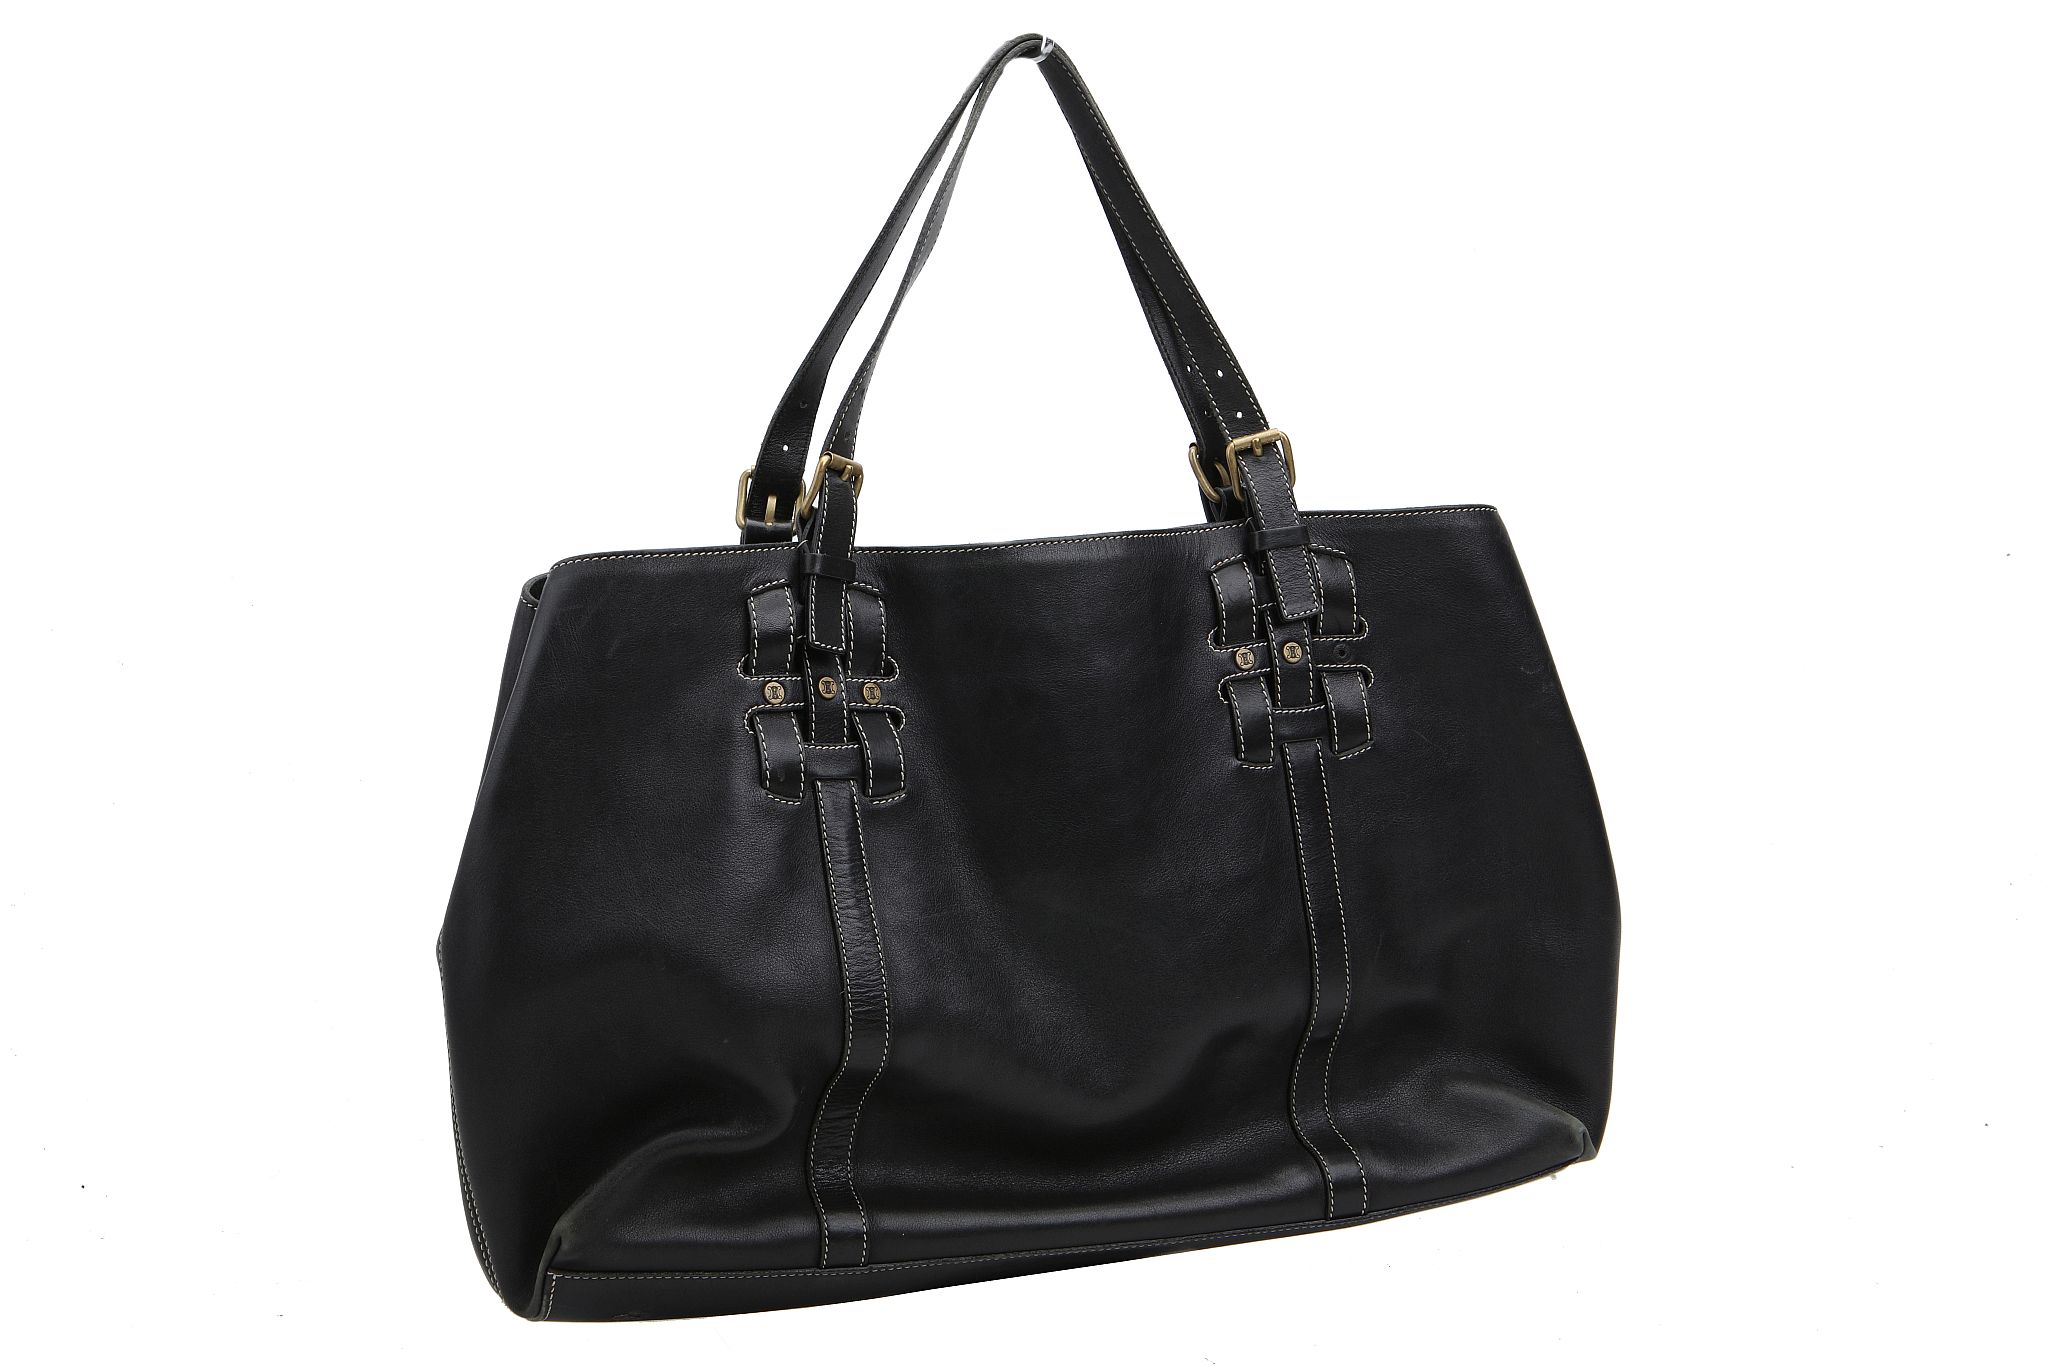 CELINE SHOPPER, black leather with white stitching, brass hardware, 48cm wide, 30cm high - Image 4 of 10